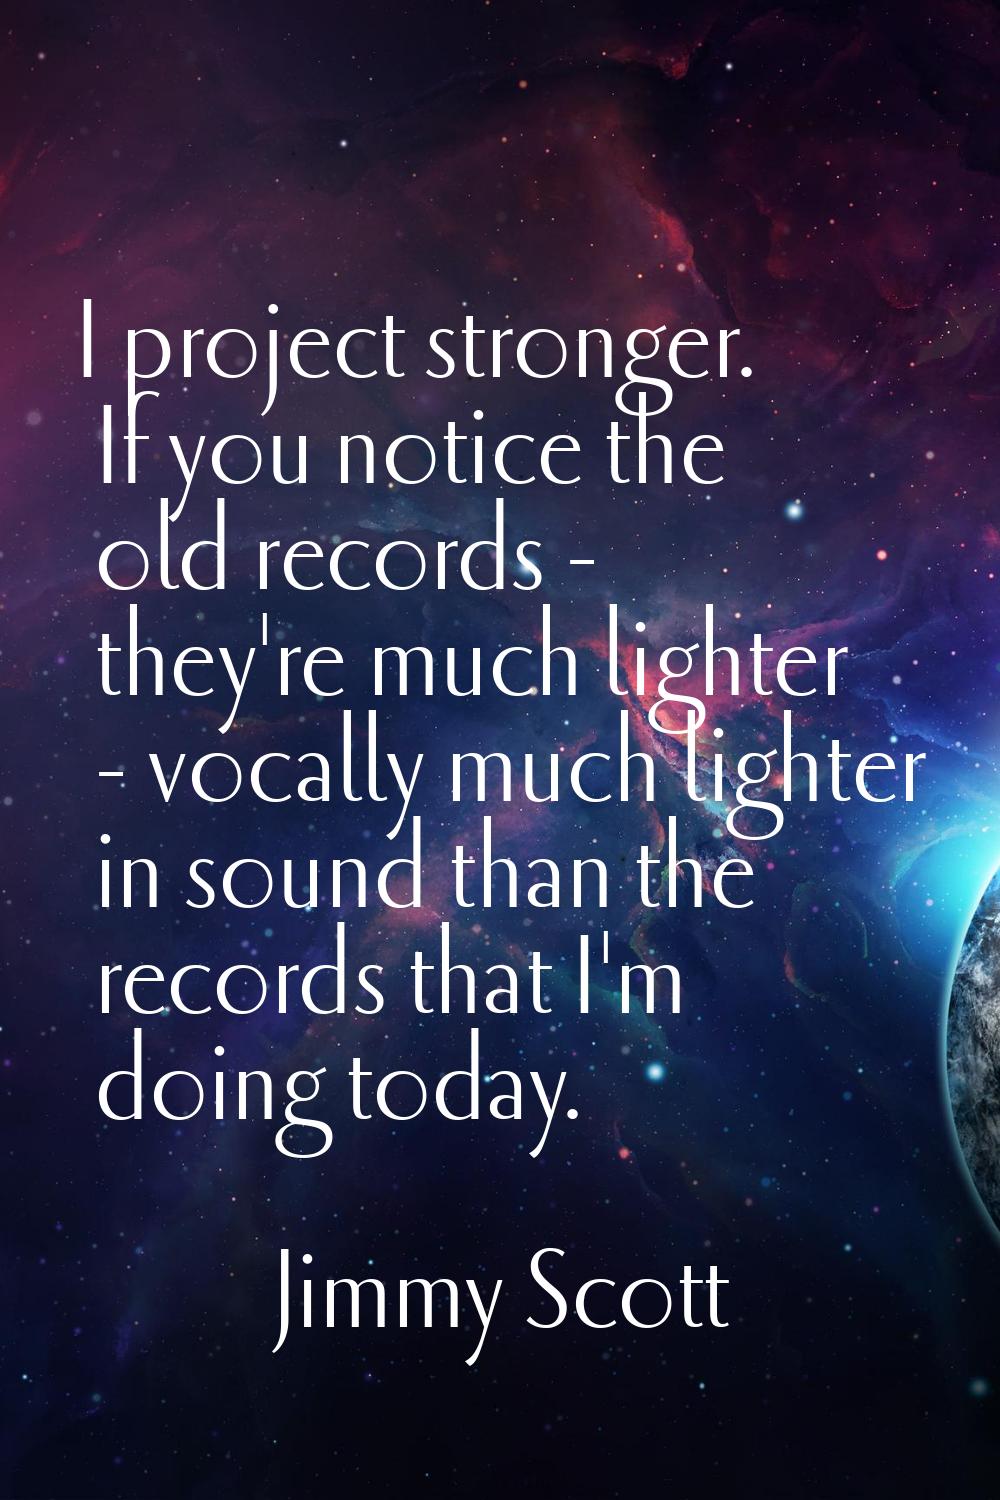 I project stronger. If you notice the old records - they're much lighter - vocally much lighter in 